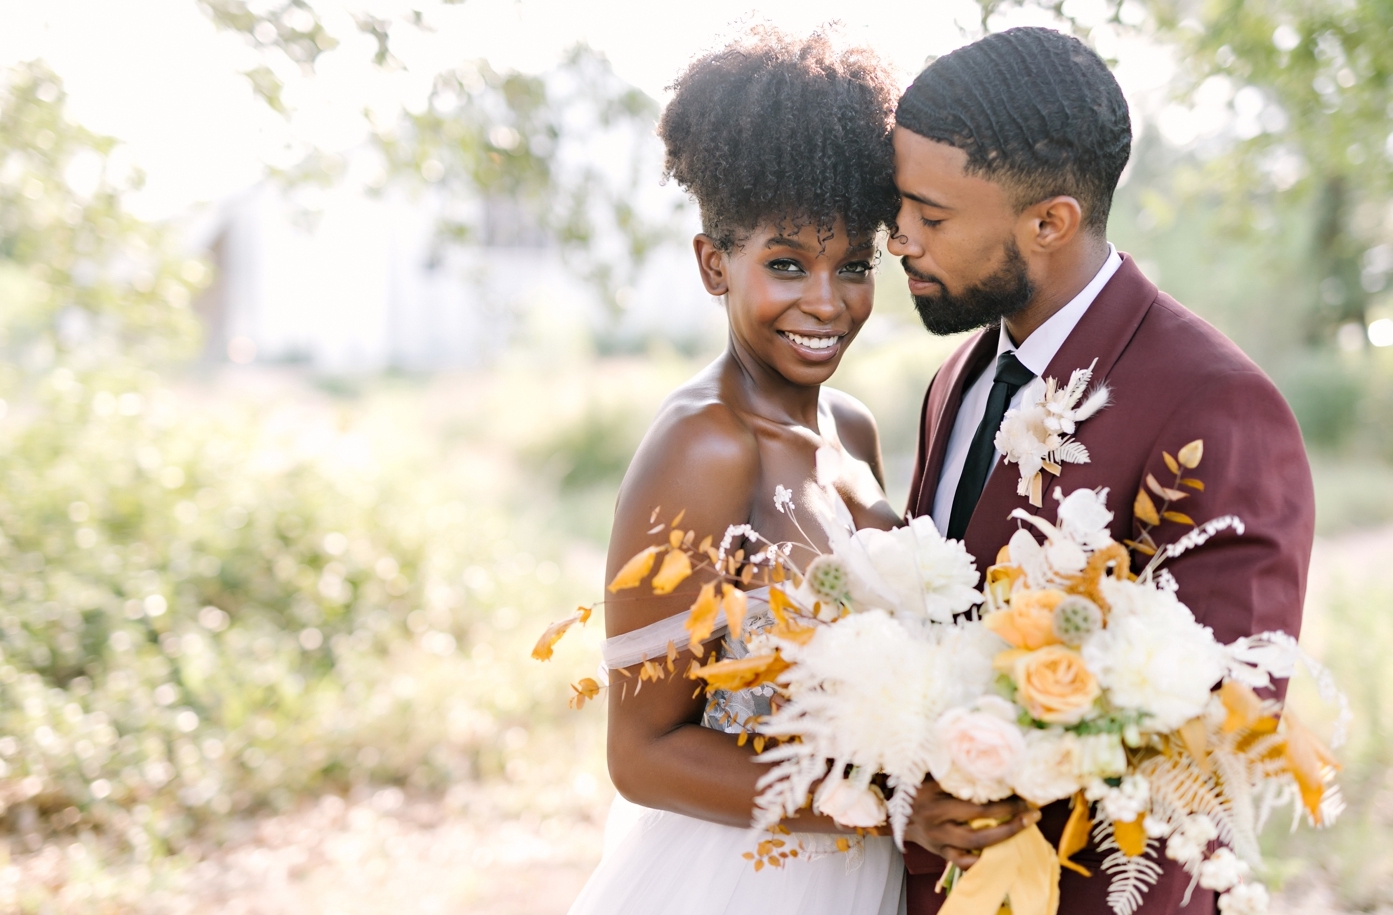 Best Wedding Day Tips From An Austin Photographer - Julie Wilhite Photography